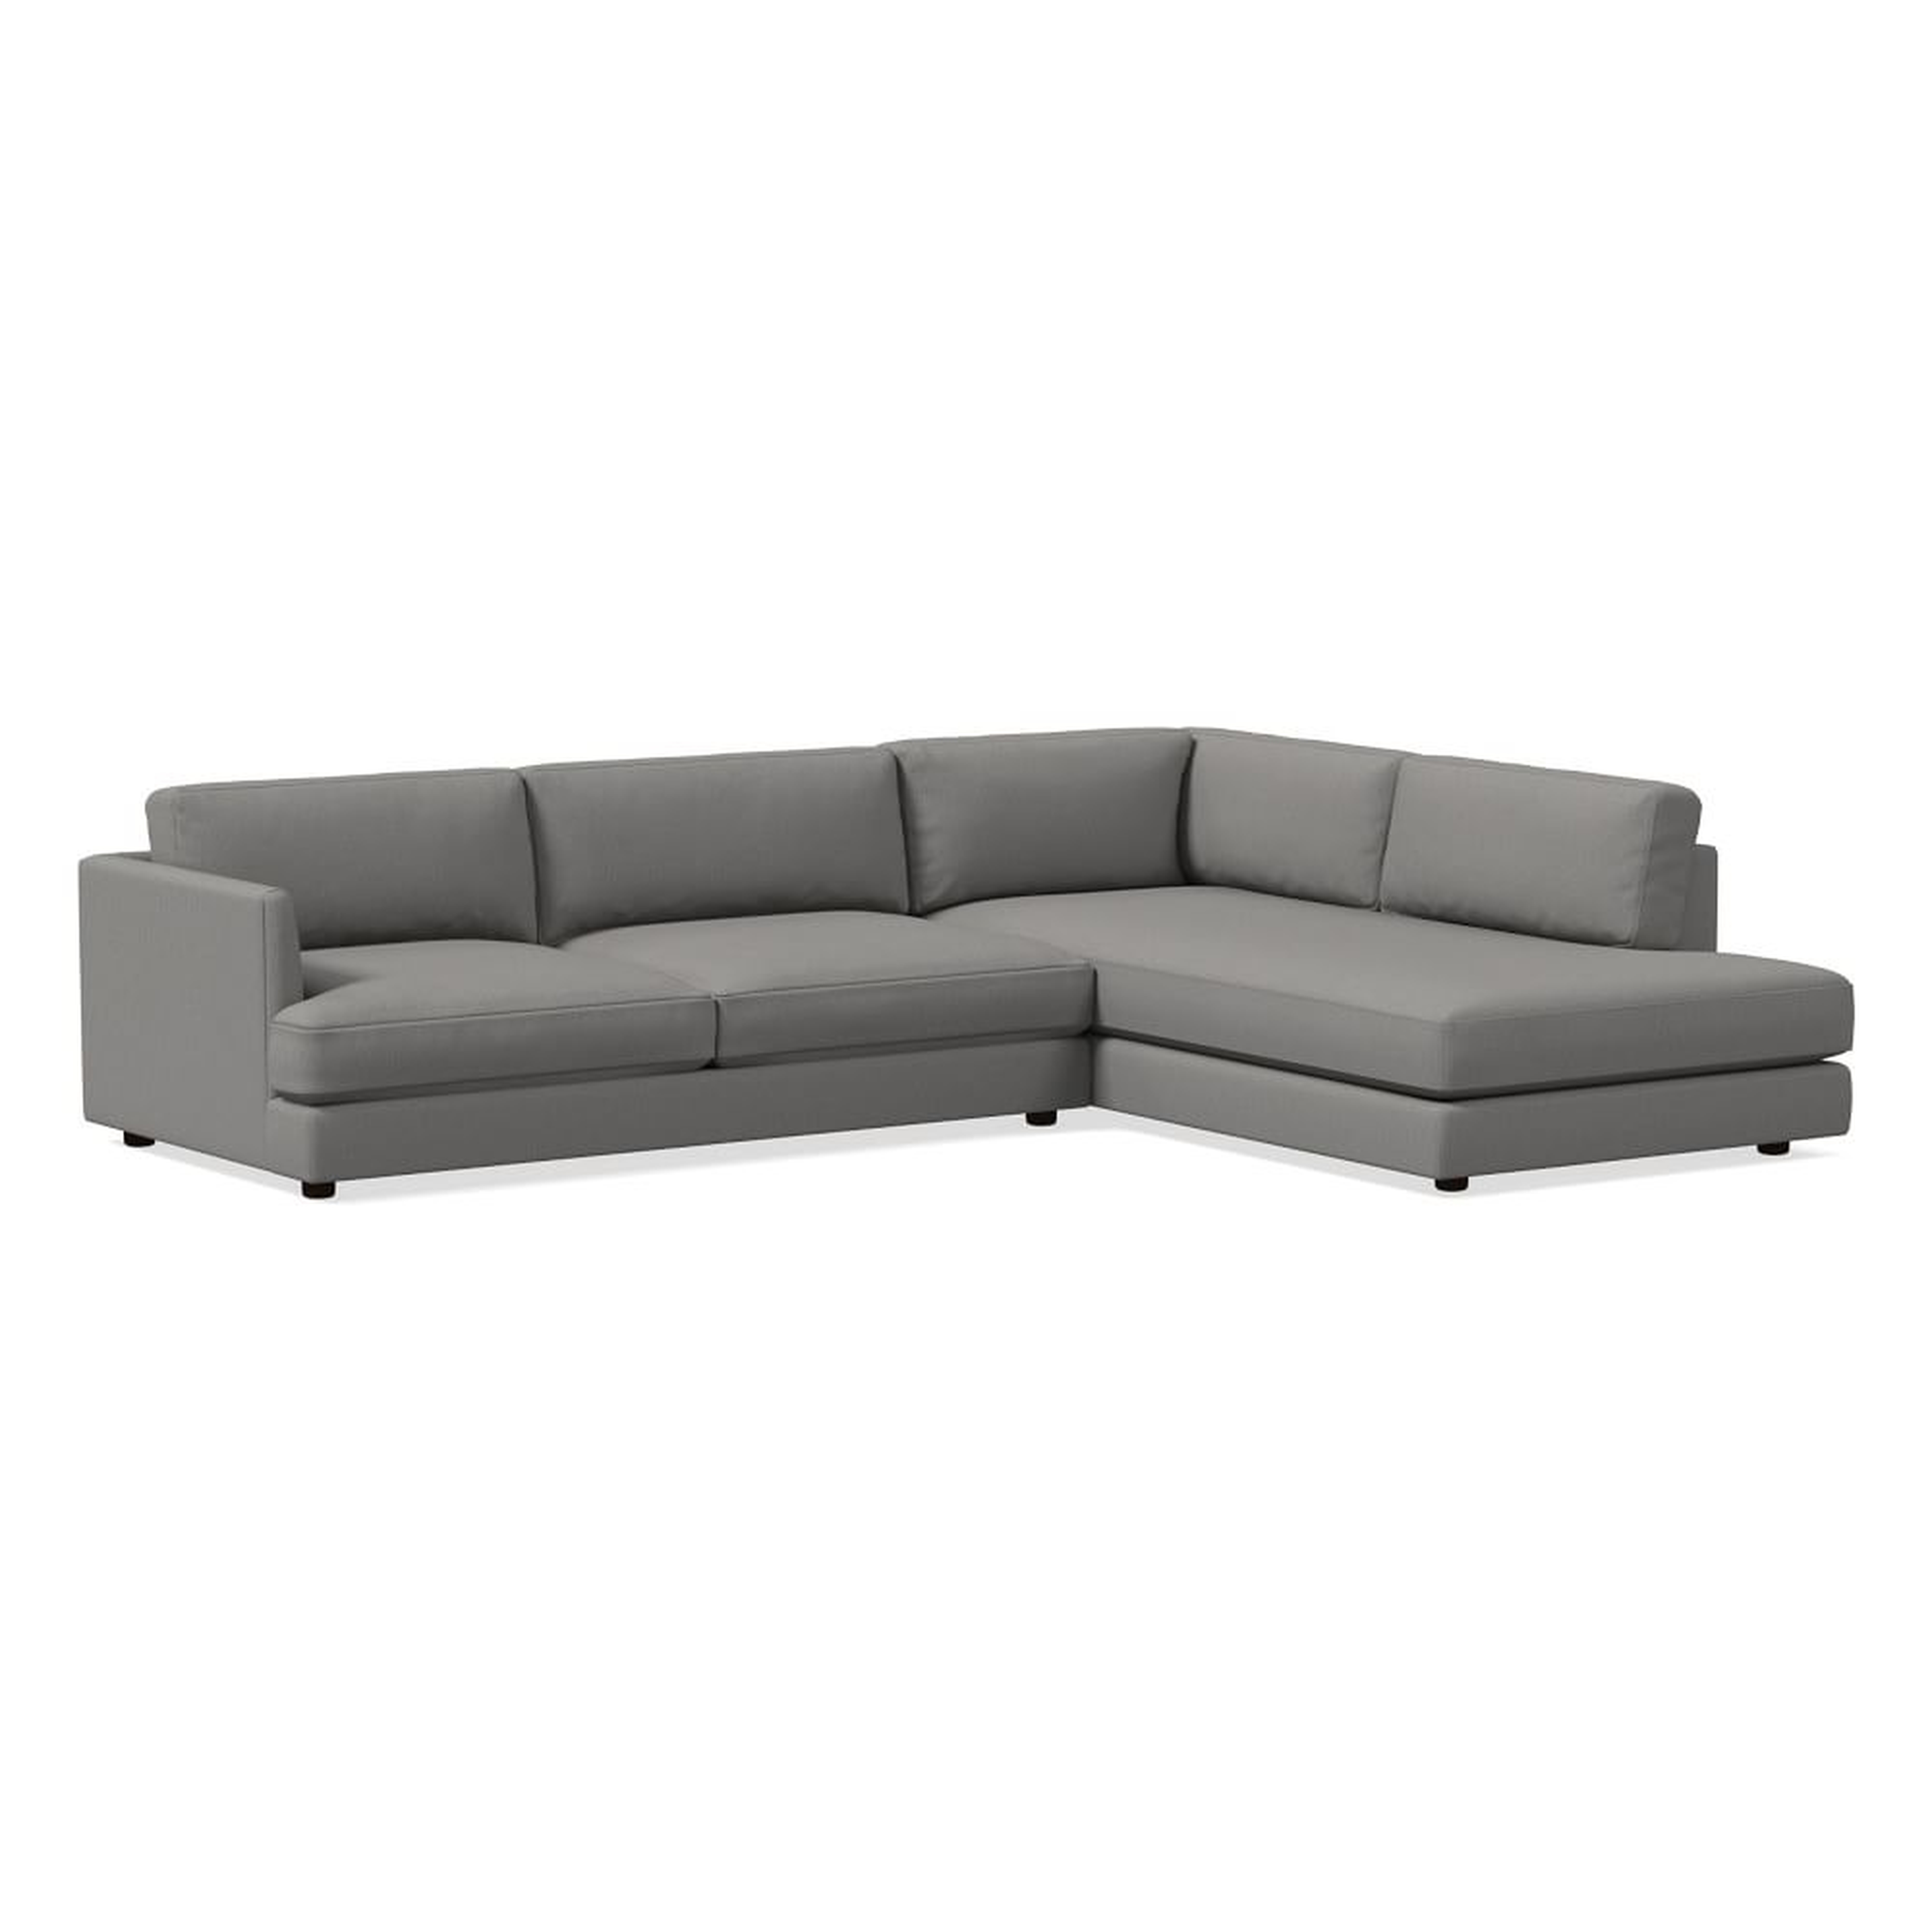 Haven 113" Right Multi Seat 2-Piece Bumper Chaise Sectional, Extra Deep Depth, Performance Washed Canvas, Storm Gray - West Elm